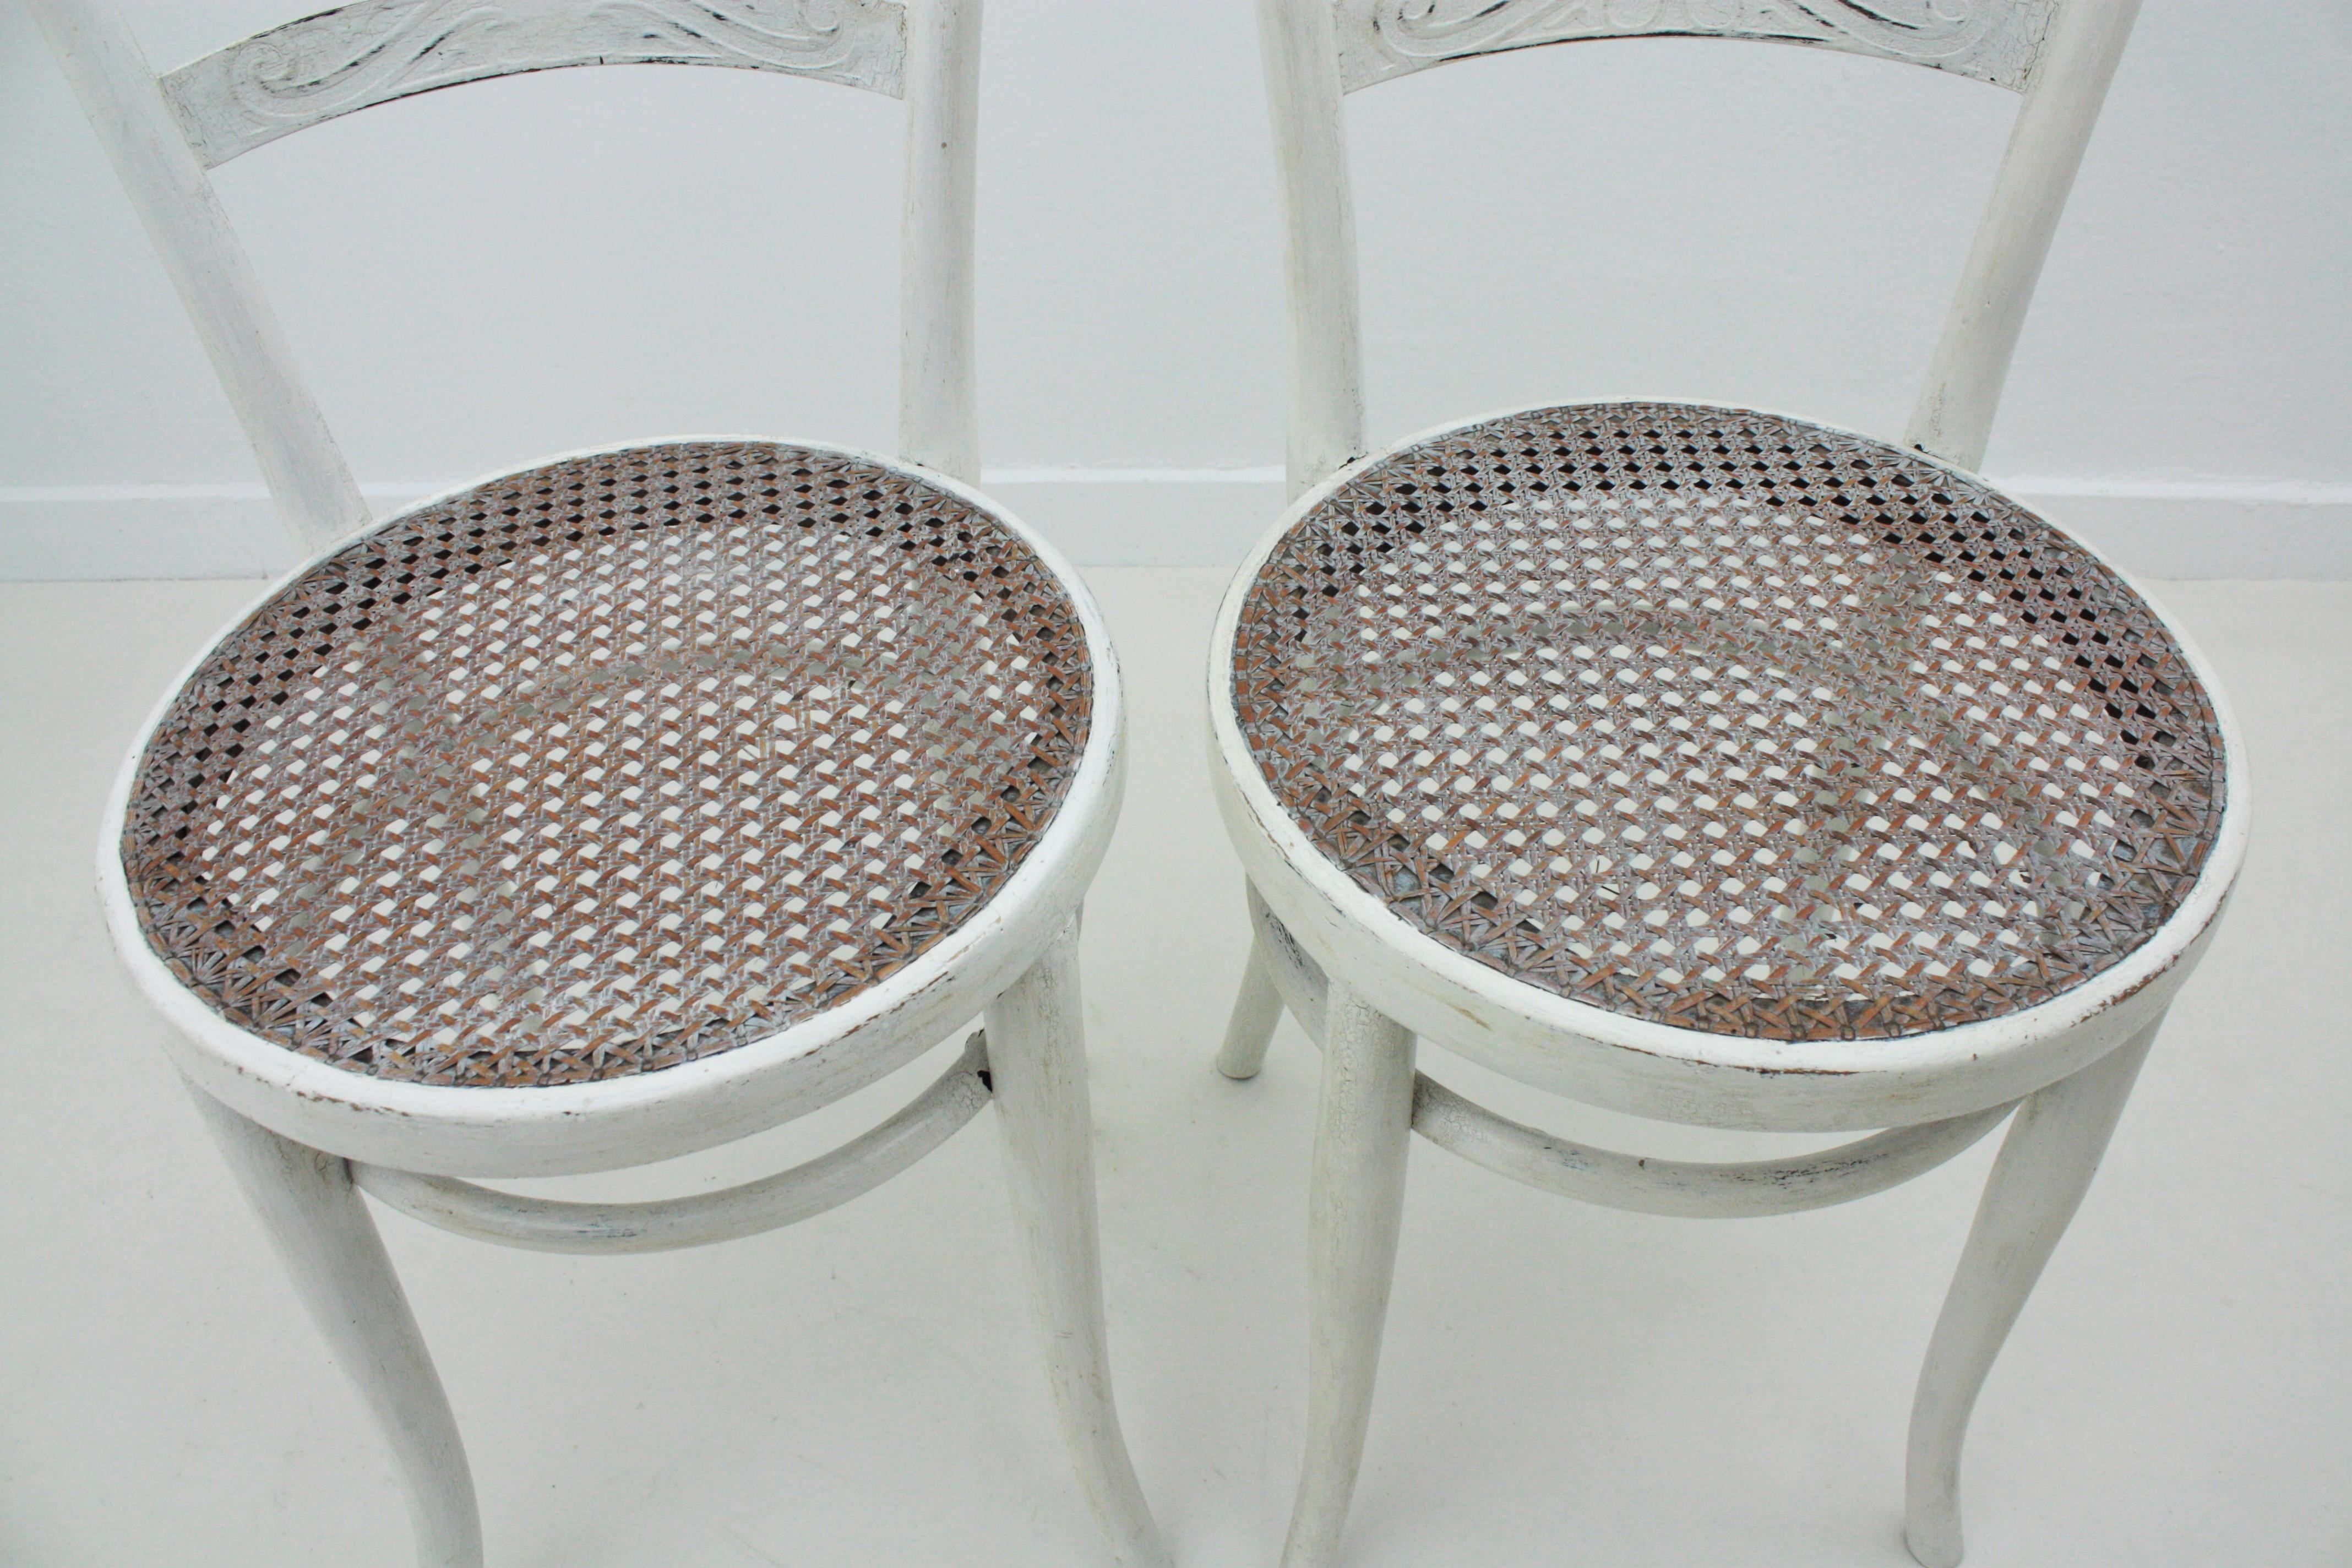 Jacob & Josef Kohn Vienna Secession Patinated Chairs with Wicker Seats, Pair For Sale 3